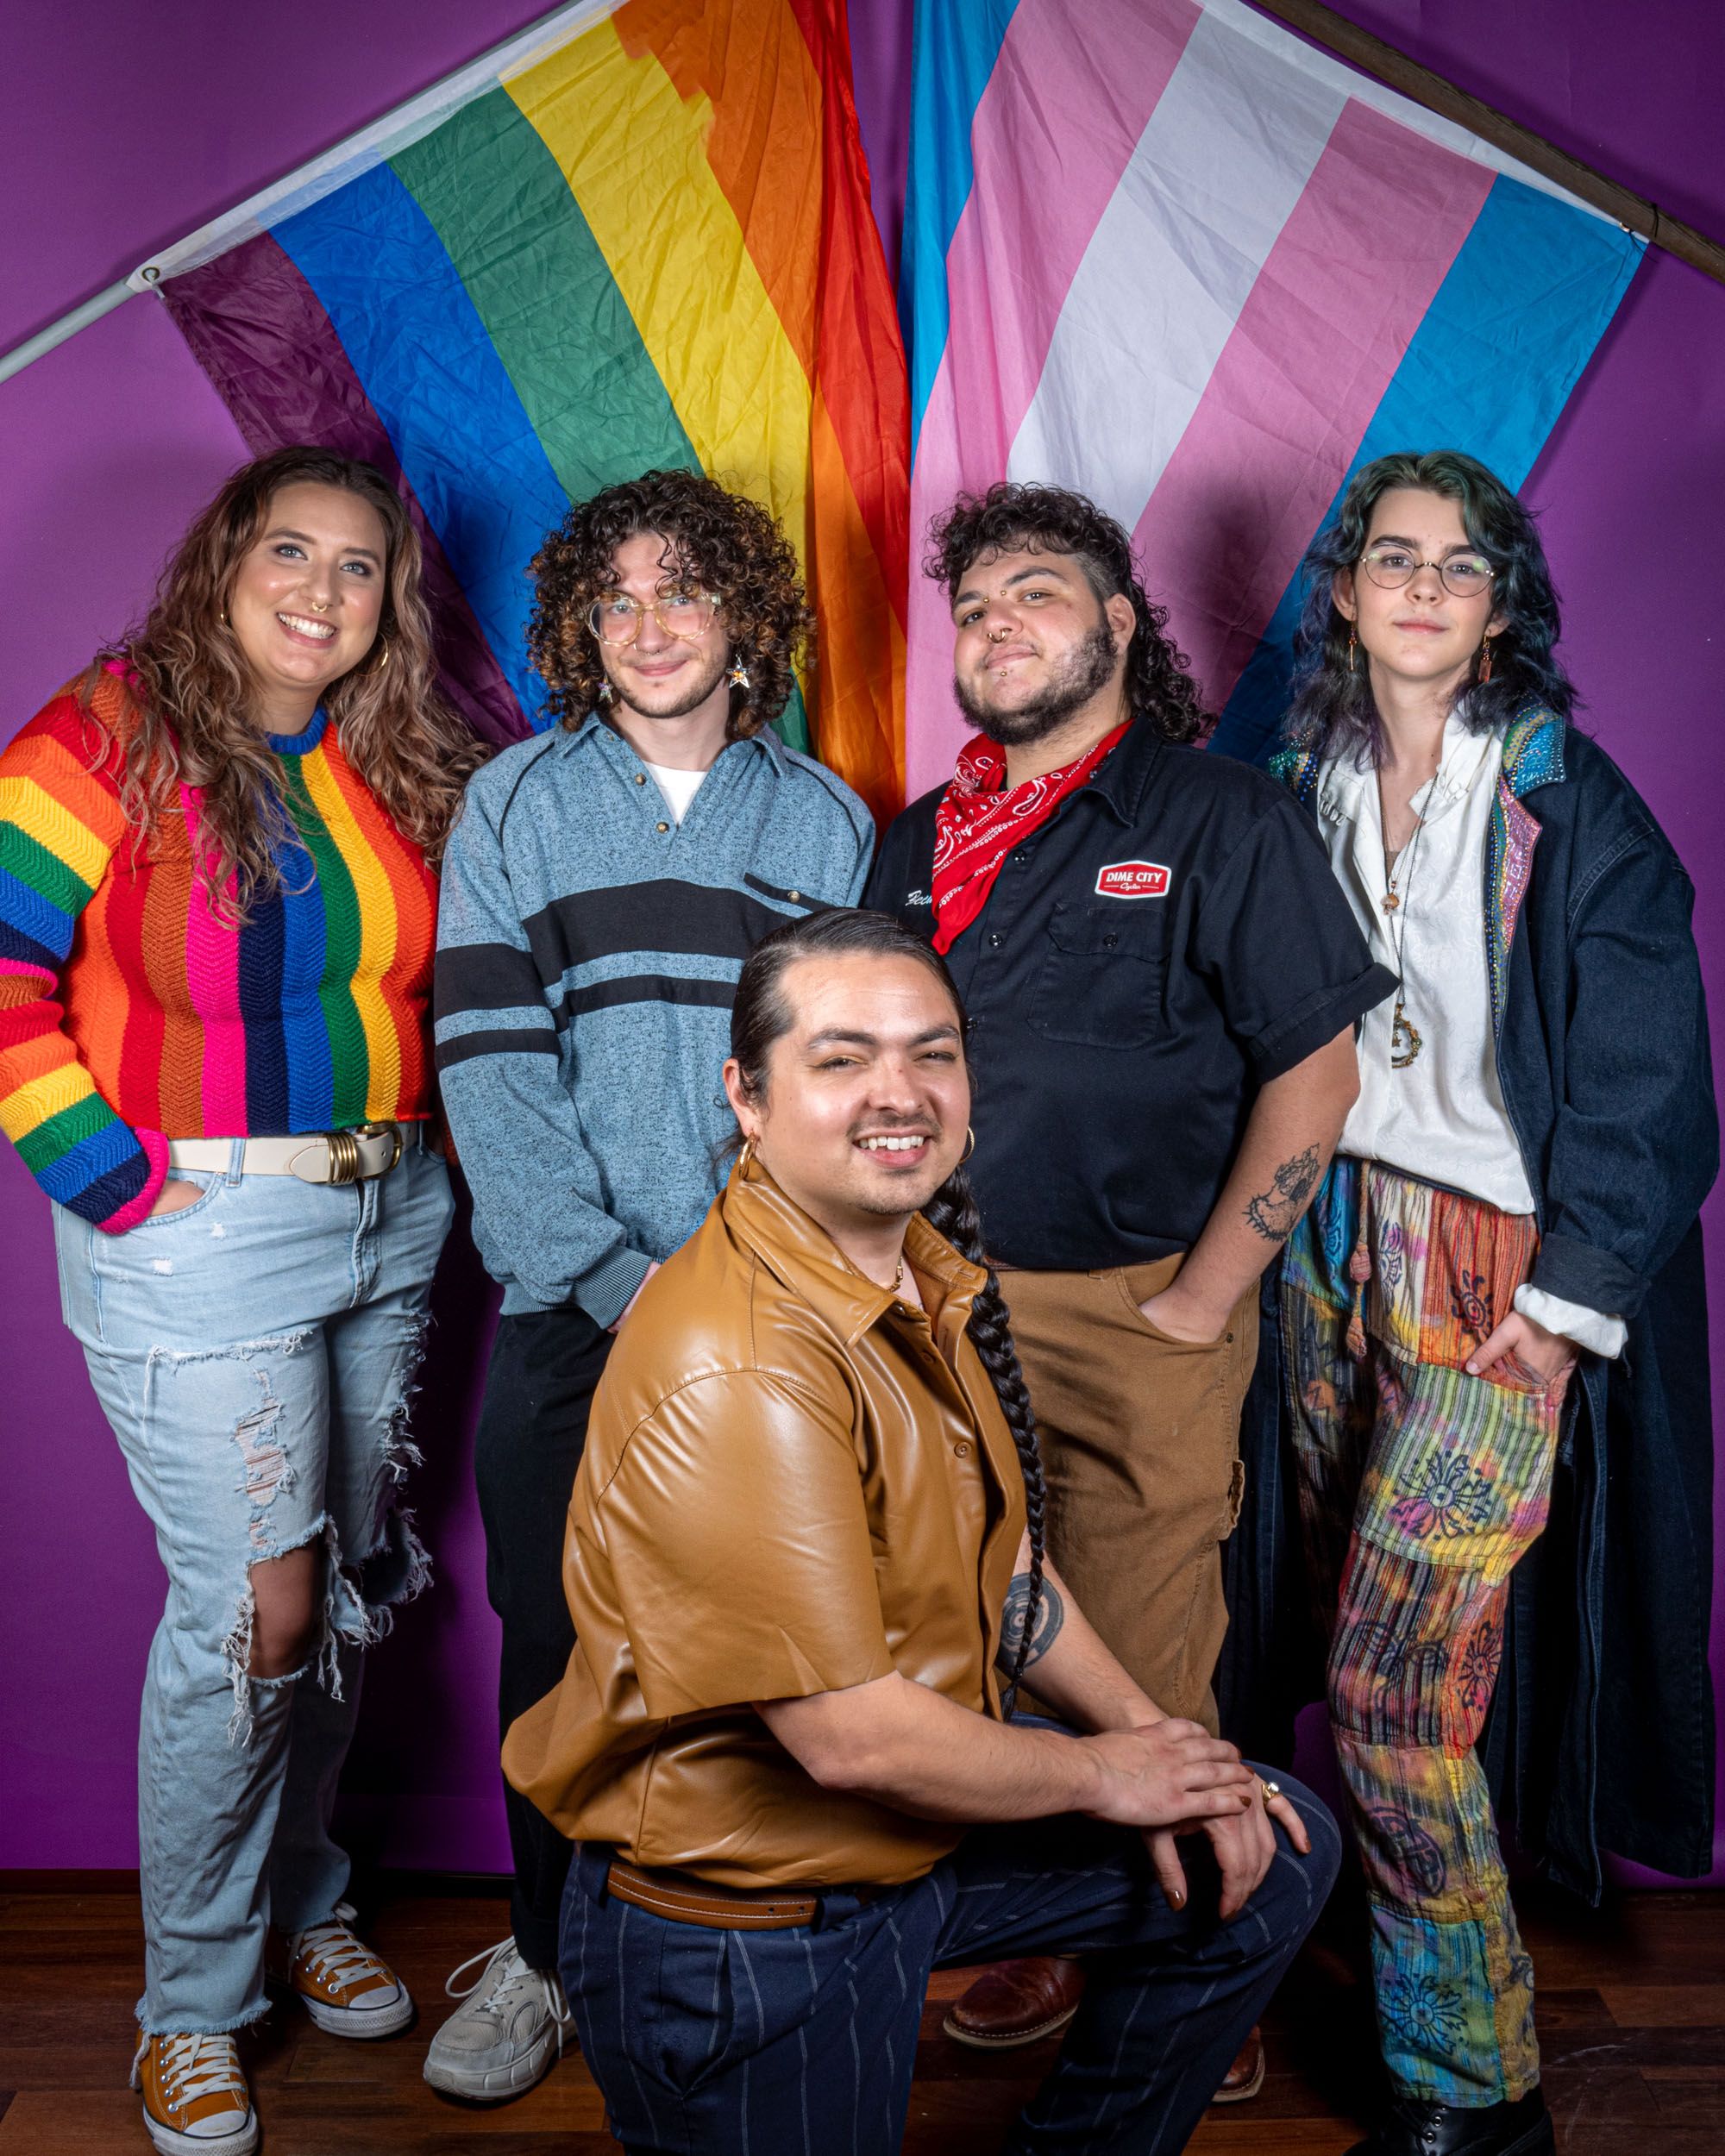 5 people are gathered together smiling in front of pride and trans flags and a purple background.